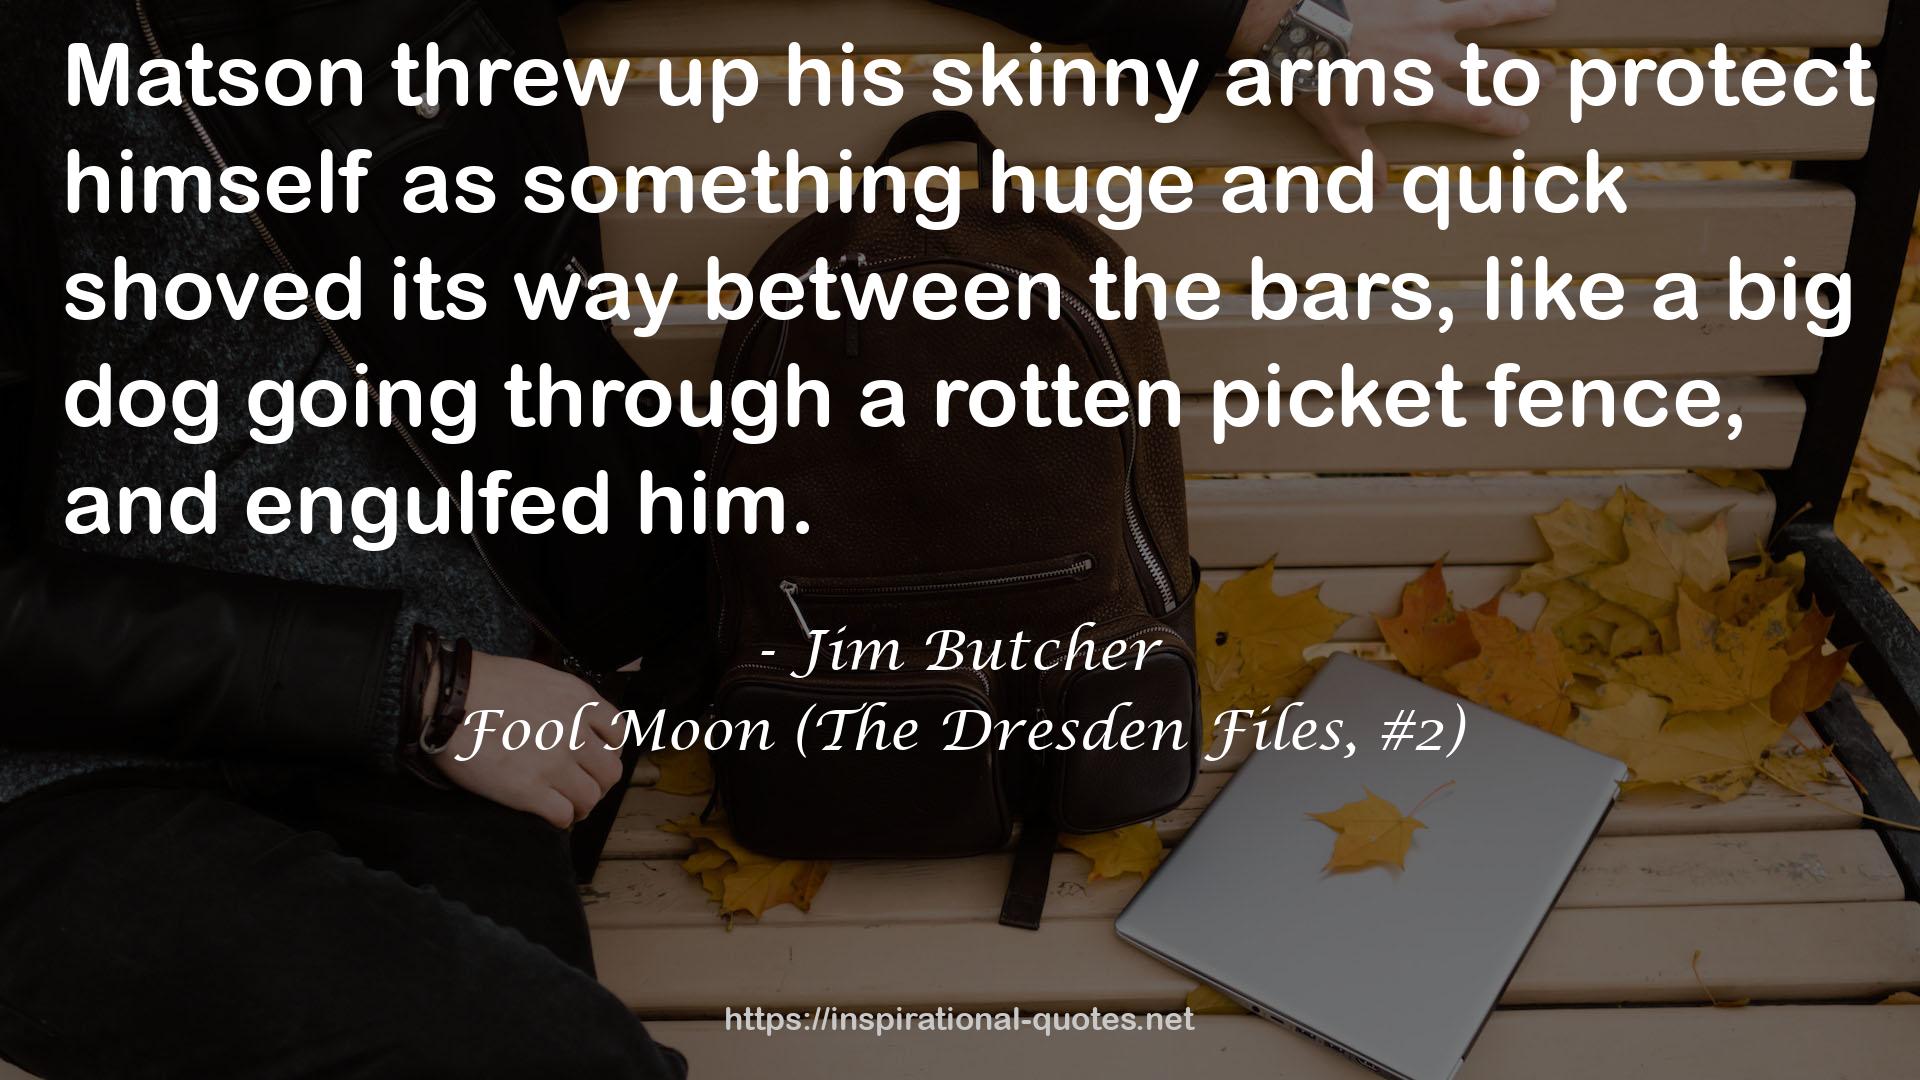 Fool Moon (The Dresden Files, #2) QUOTES